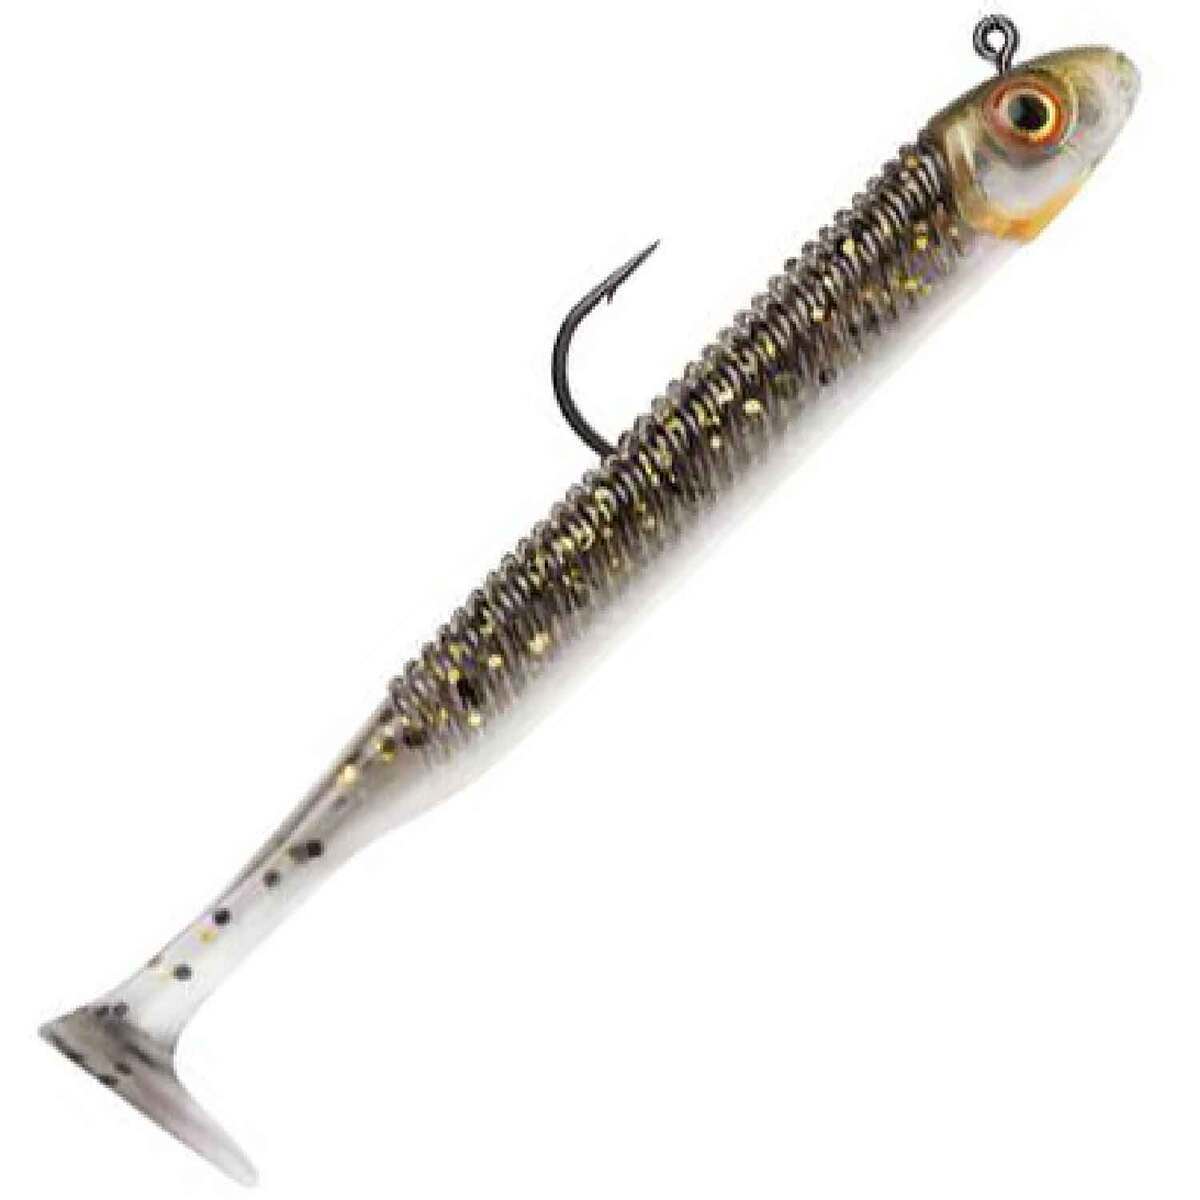 Shop for Slab Spoon at Castaic Fishing. Get free shipping when you